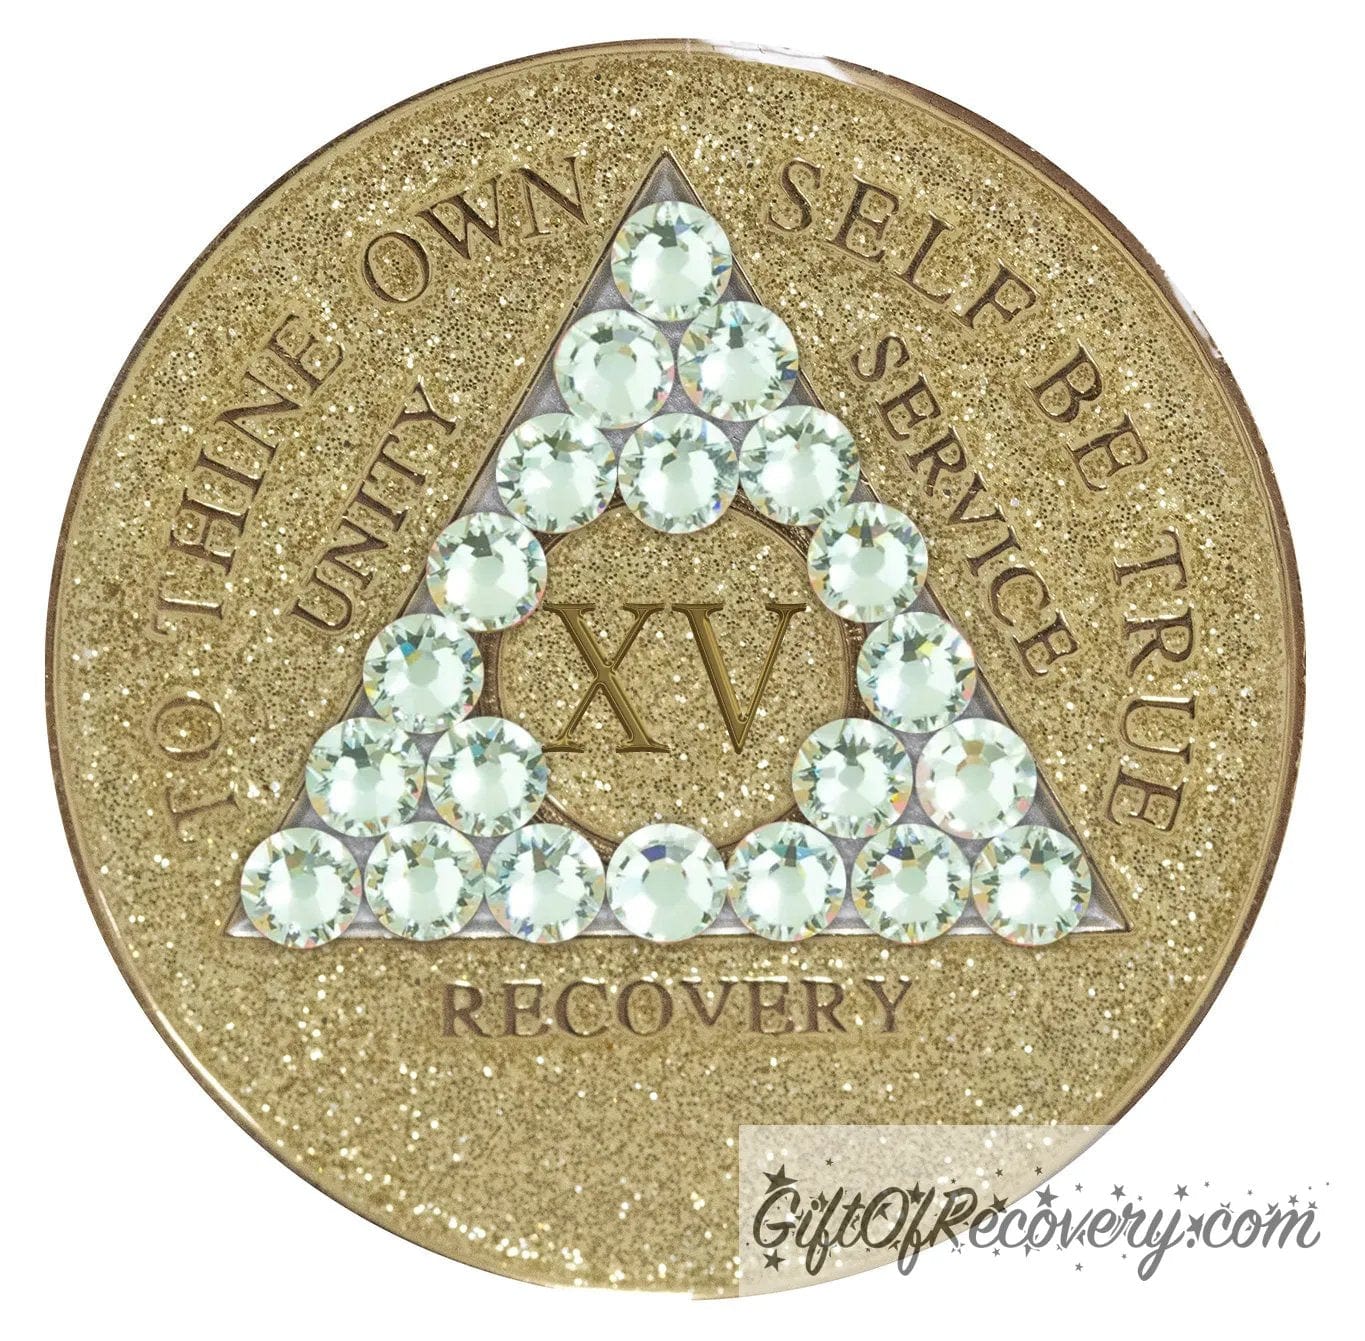 15 year AA medallion in gold glitter with twenty-one genuine diamond CZ crystals in the shape of a triangle, symbolizing transformation under pressure, to thine own self be true, unity, service, recovery and roman numeral are embossed with 14k gold-plated brass along with outer rim, sealed in a chip and scratch-resistant resin giving it a beautiful glossy look.